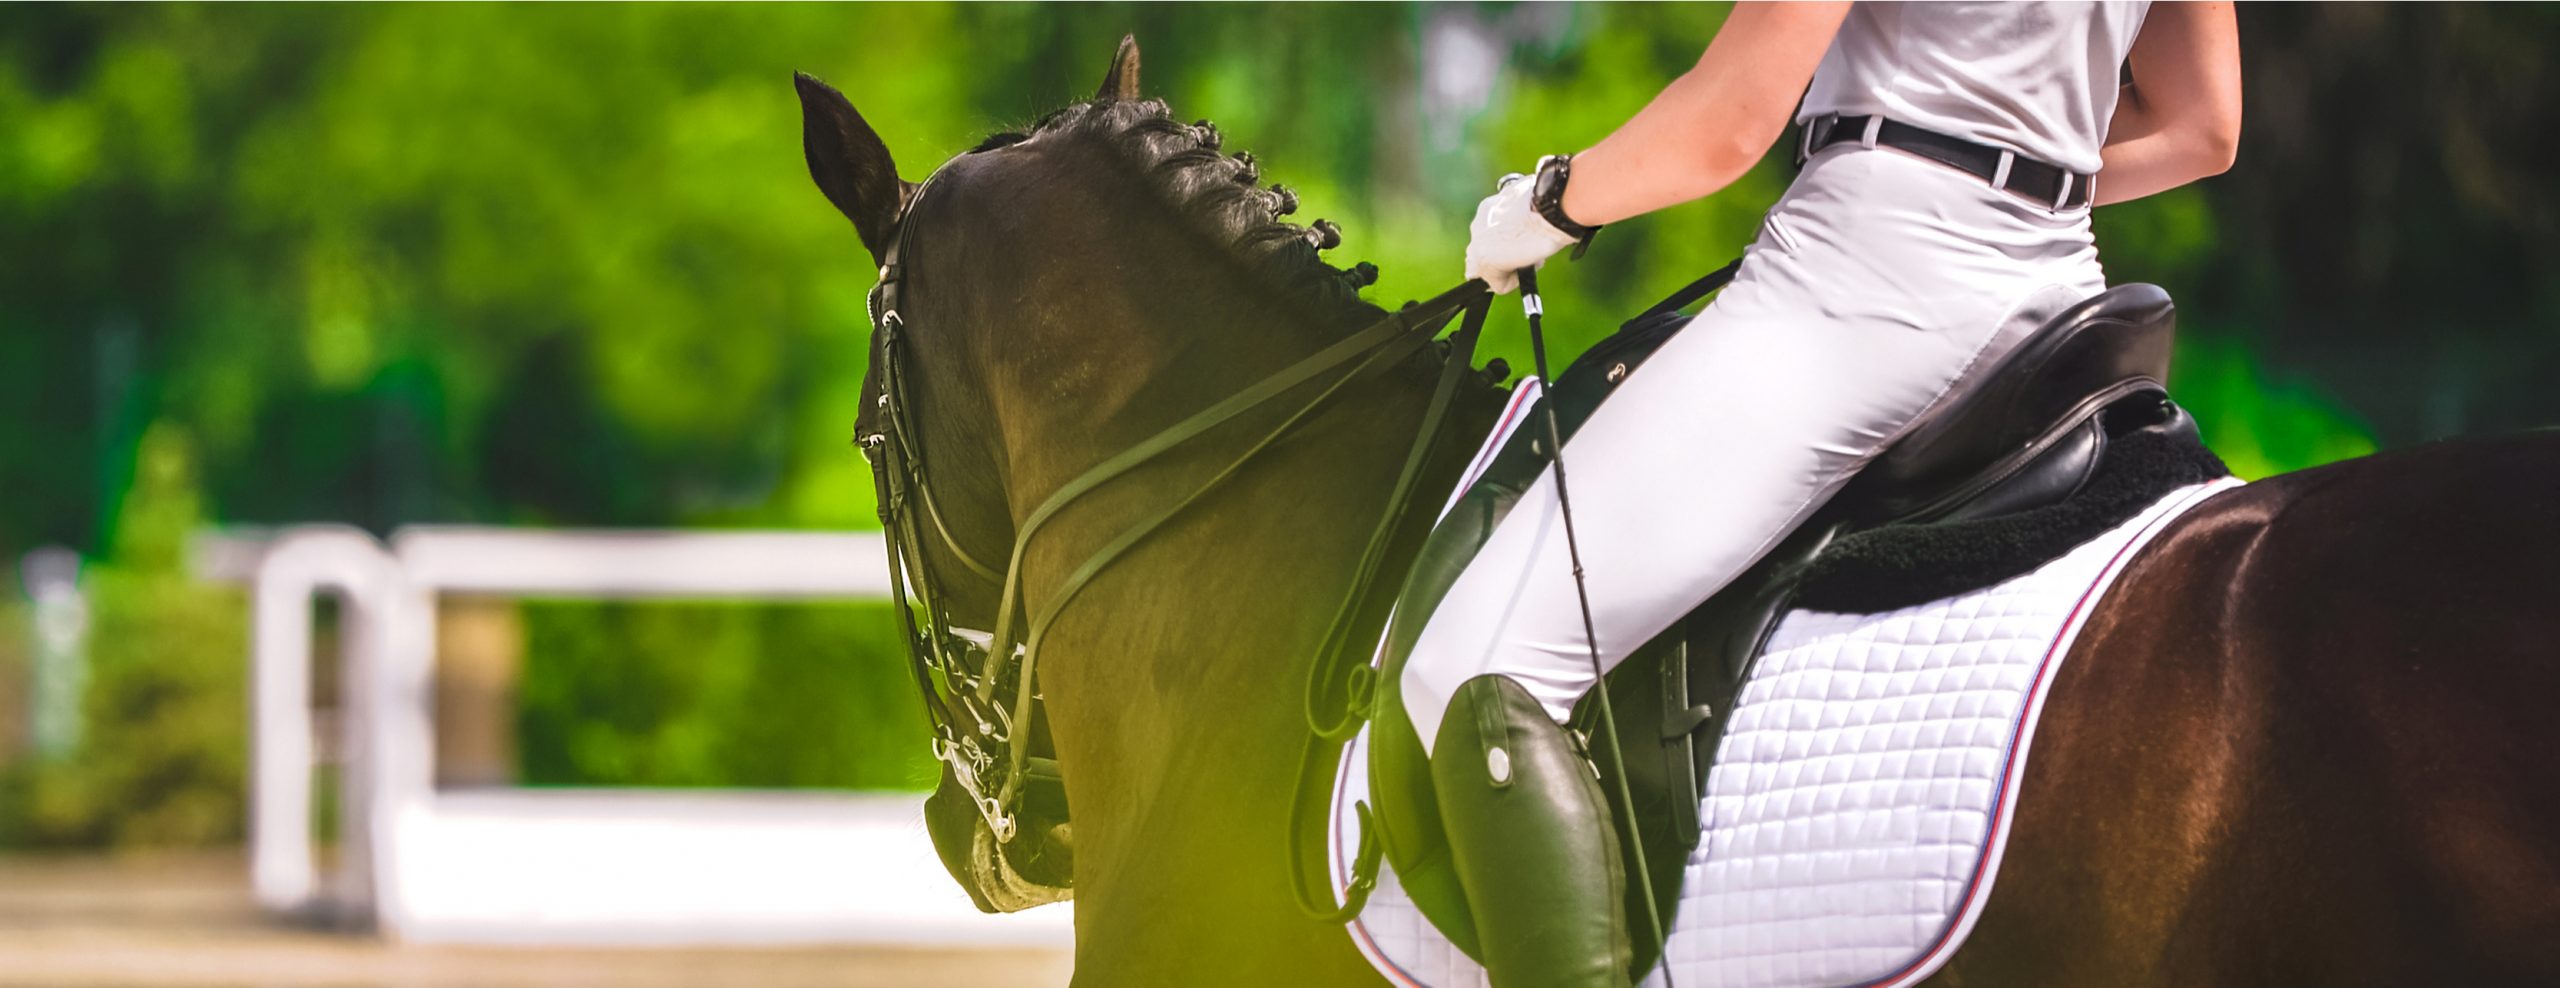 Equestrian Laundry Equipment available from Multibrand Professional